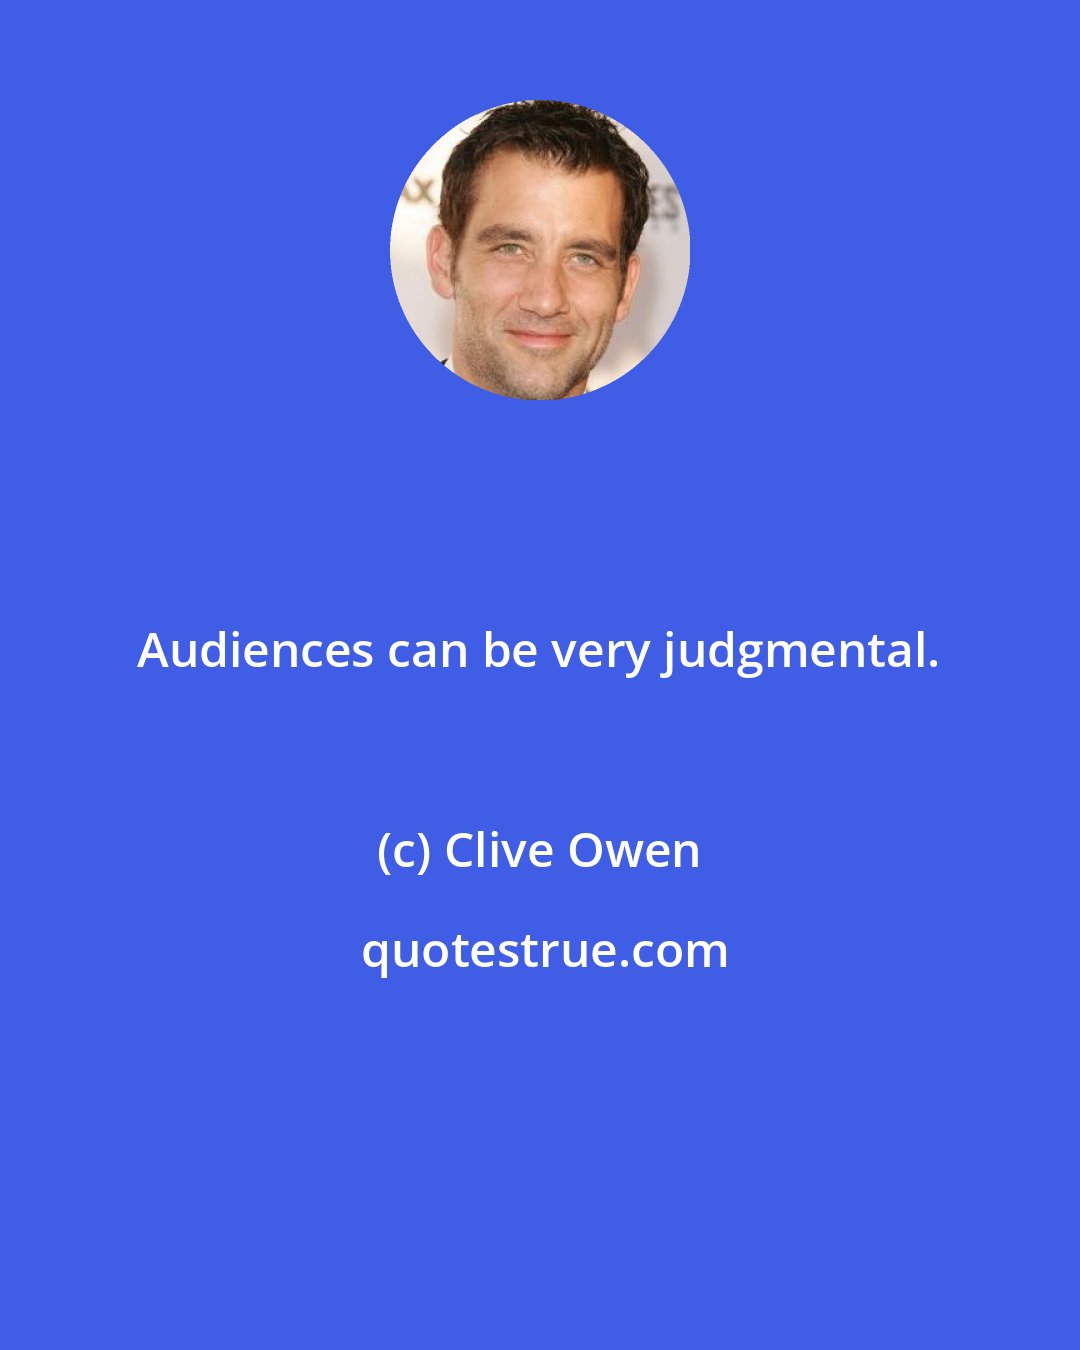 Clive Owen: Audiences can be very judgmental.